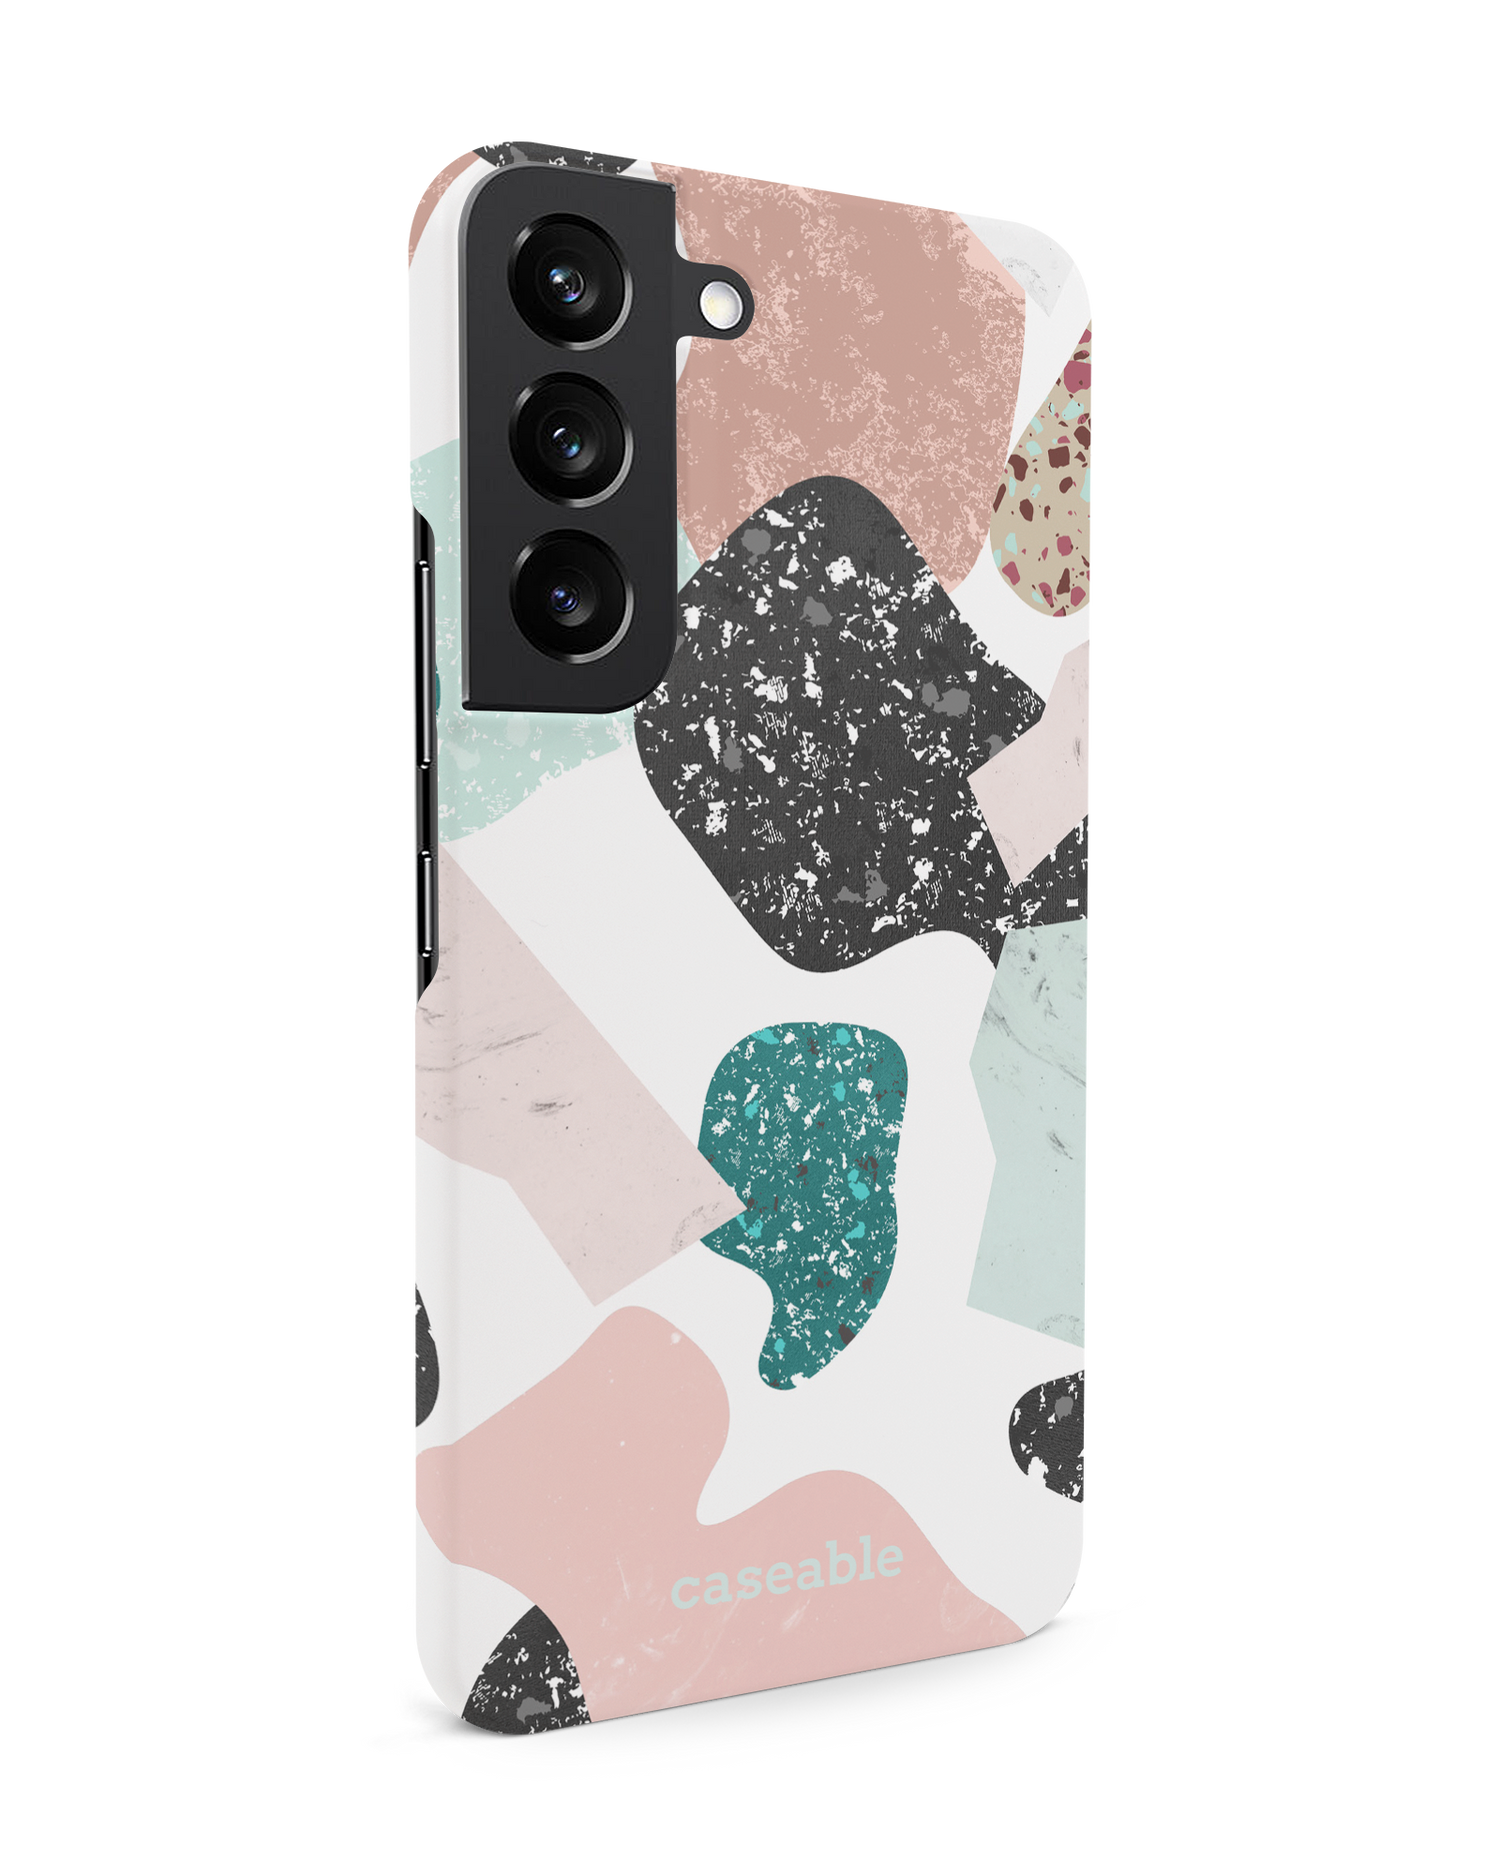 Scattered Shapes Hard Shell Phone Case Samsung Galaxy S22 5G: View from the left side